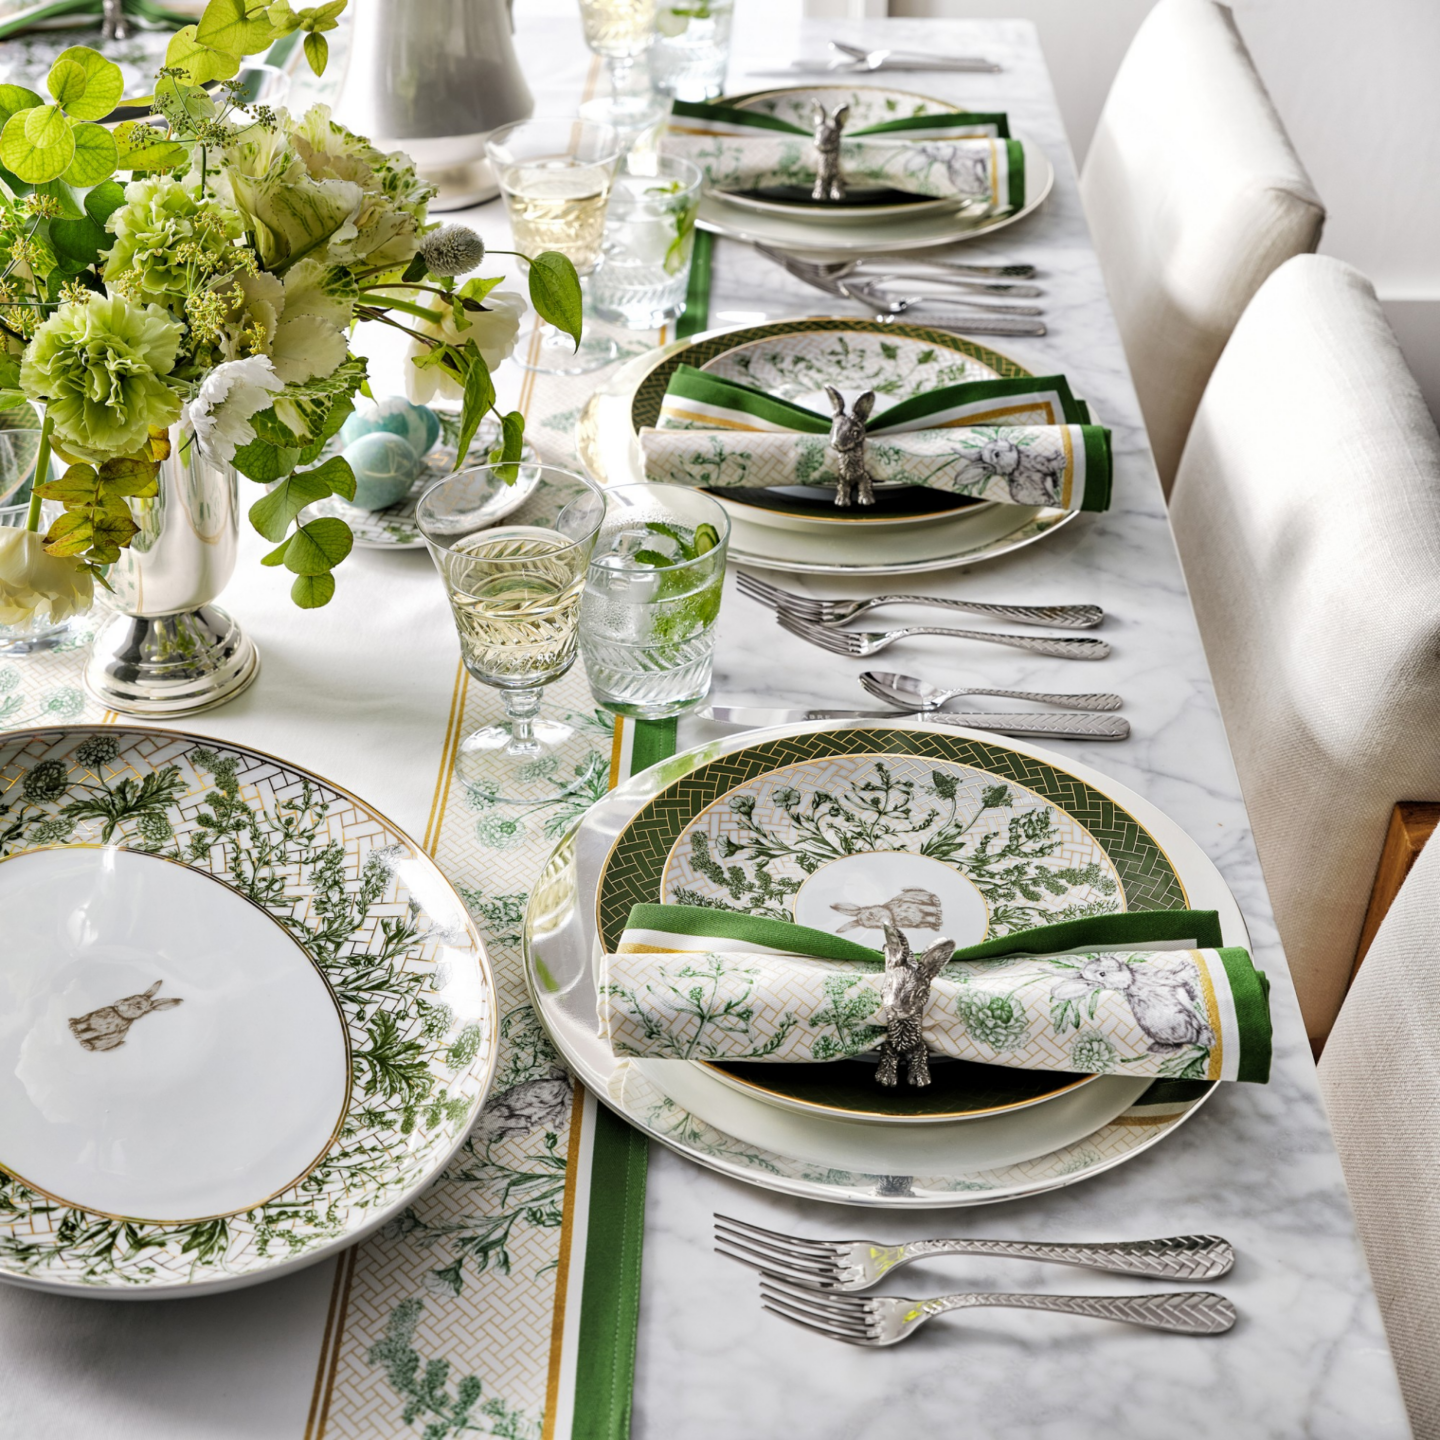 Williams Sonoma garden lattice bunny plates and beautiful spring tablescape with green.